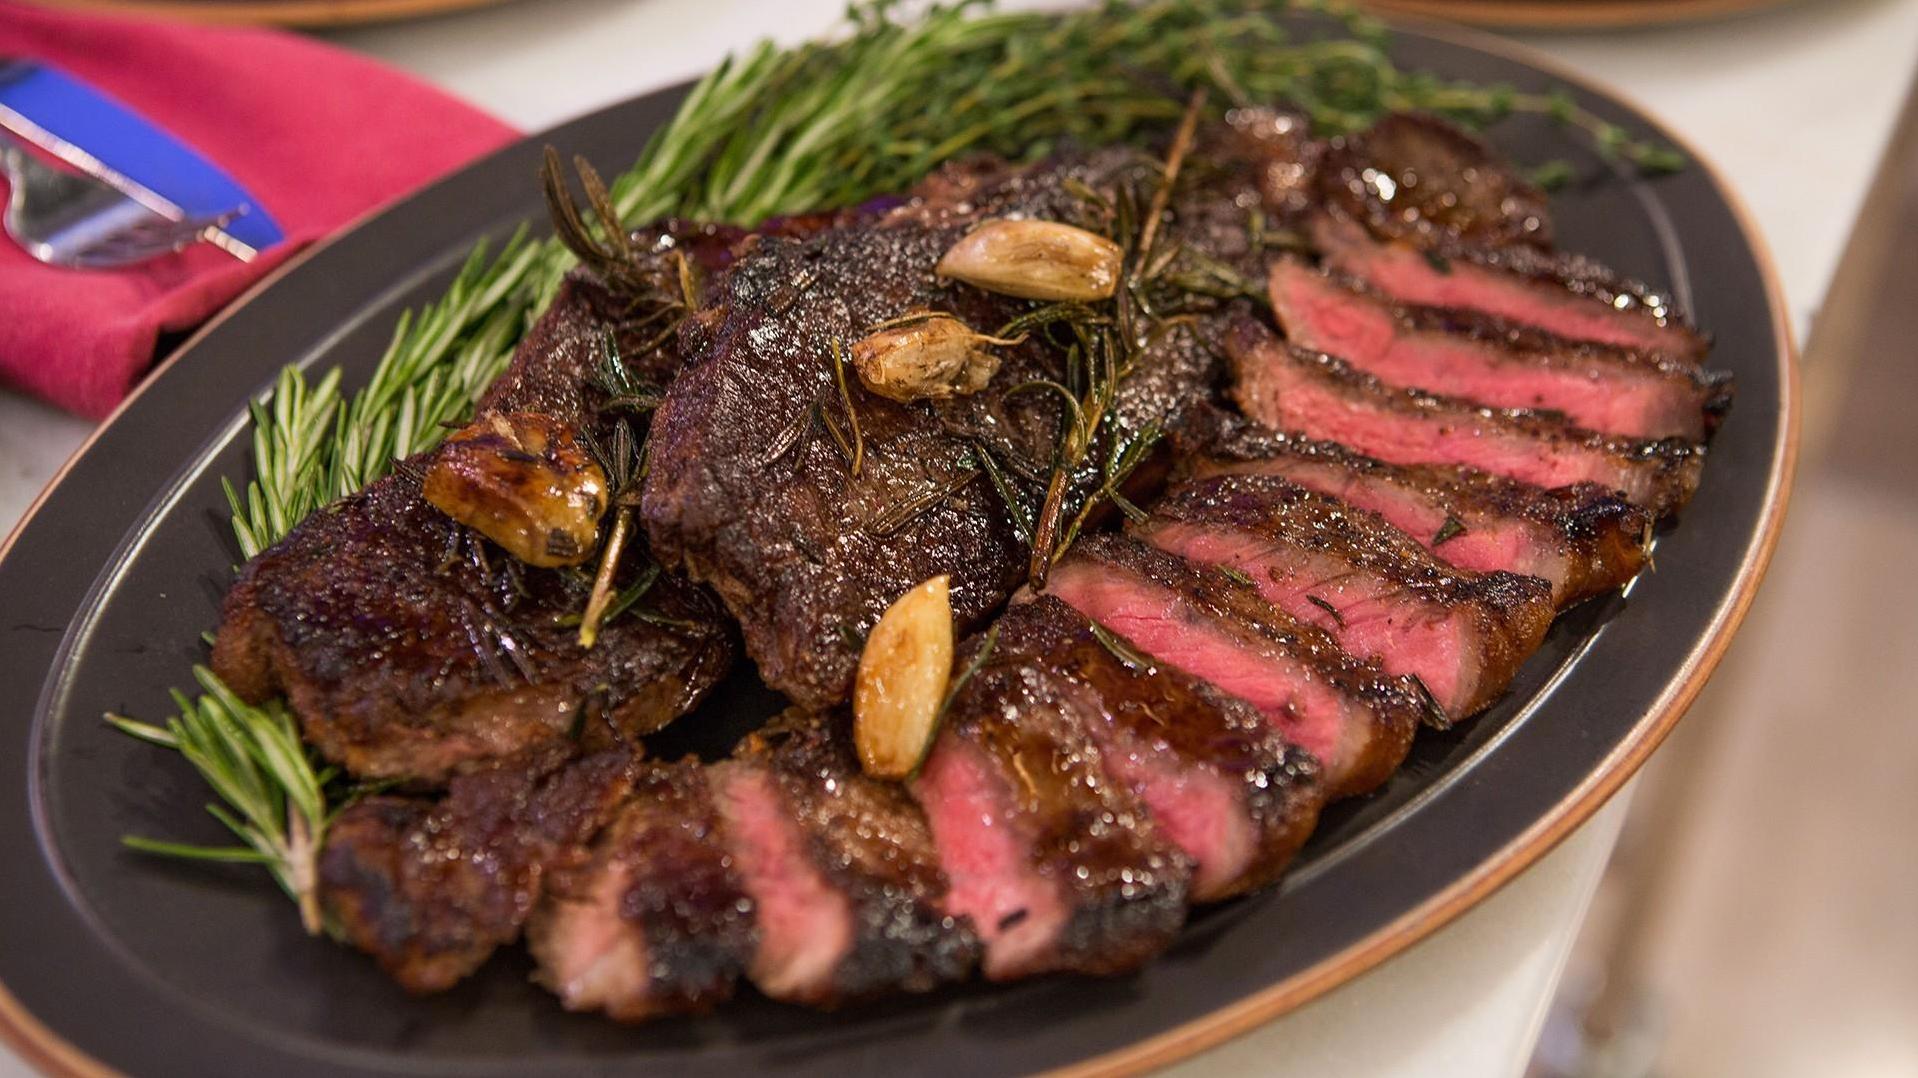  Perfectly cooked steak with a burst of flavor in each bite